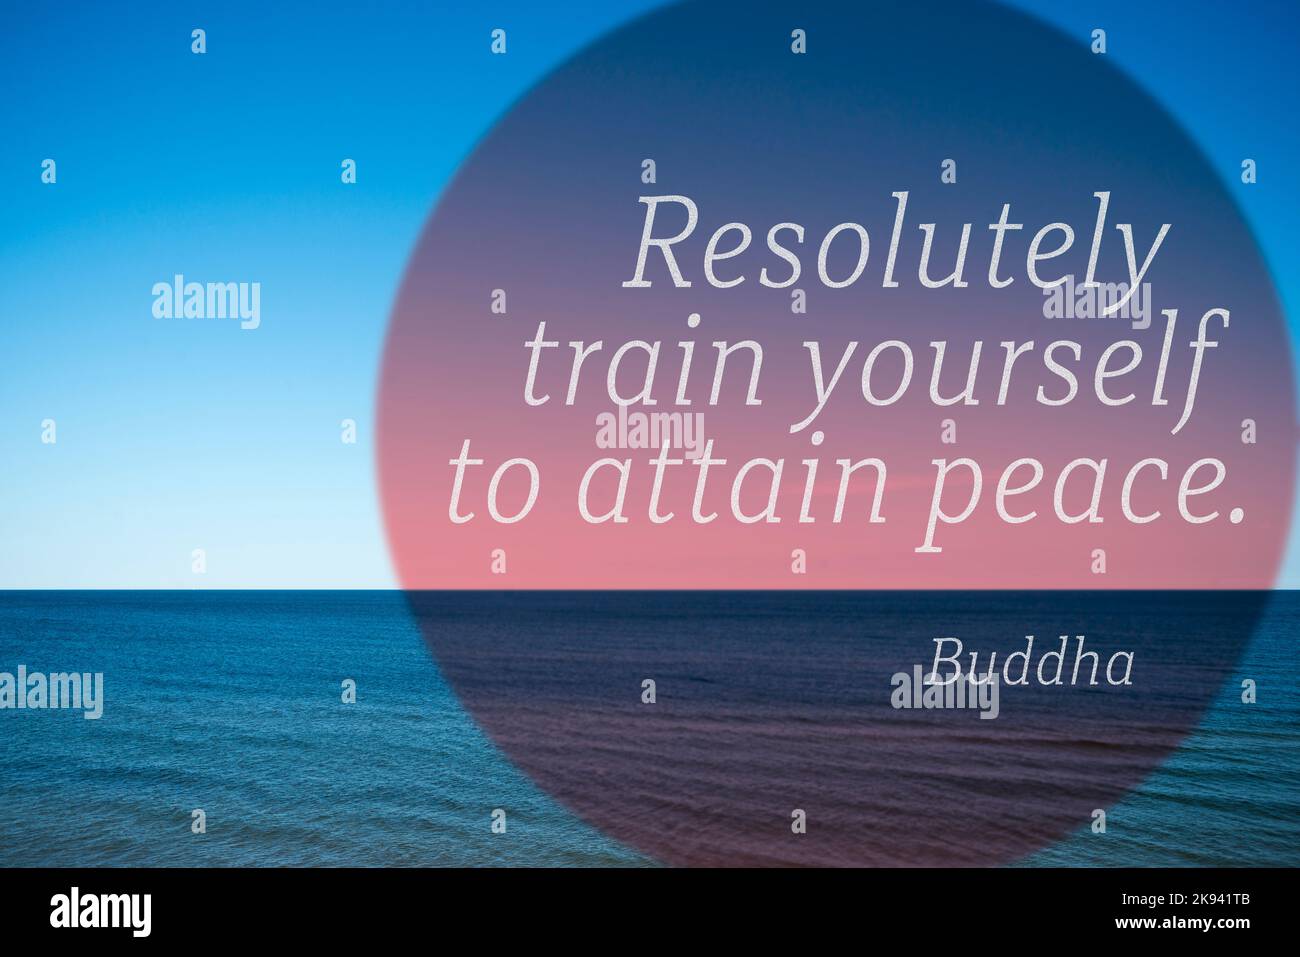 Resolutely train yourself to attain peace - famous quote of Gautama Buddha printed on photo with calm sea landscape Stock Photo